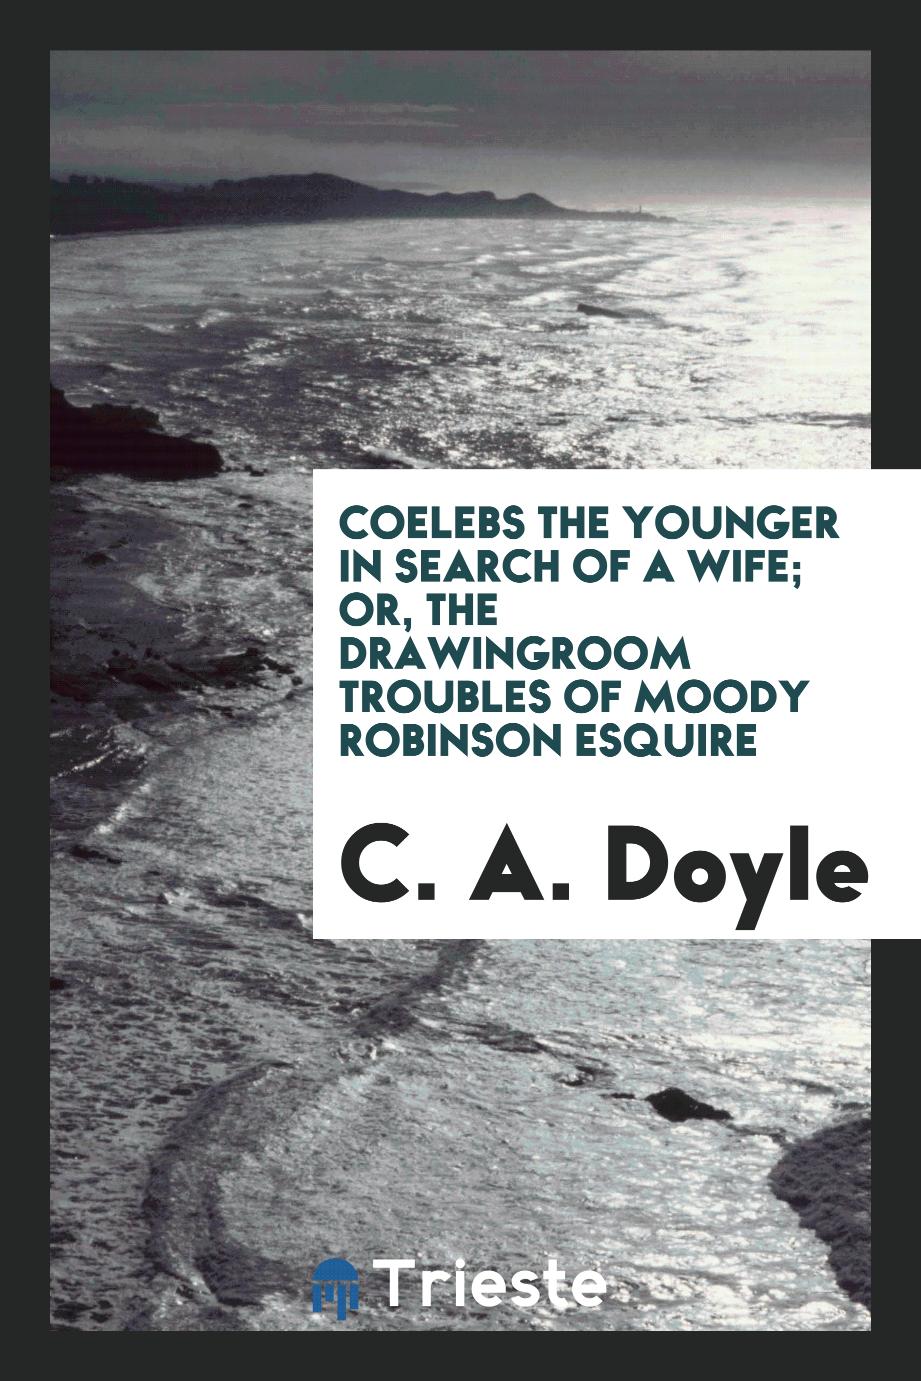 Coelebs the younger in search of a wife; or, The drawingroom troubles of Moody Robinson esquire